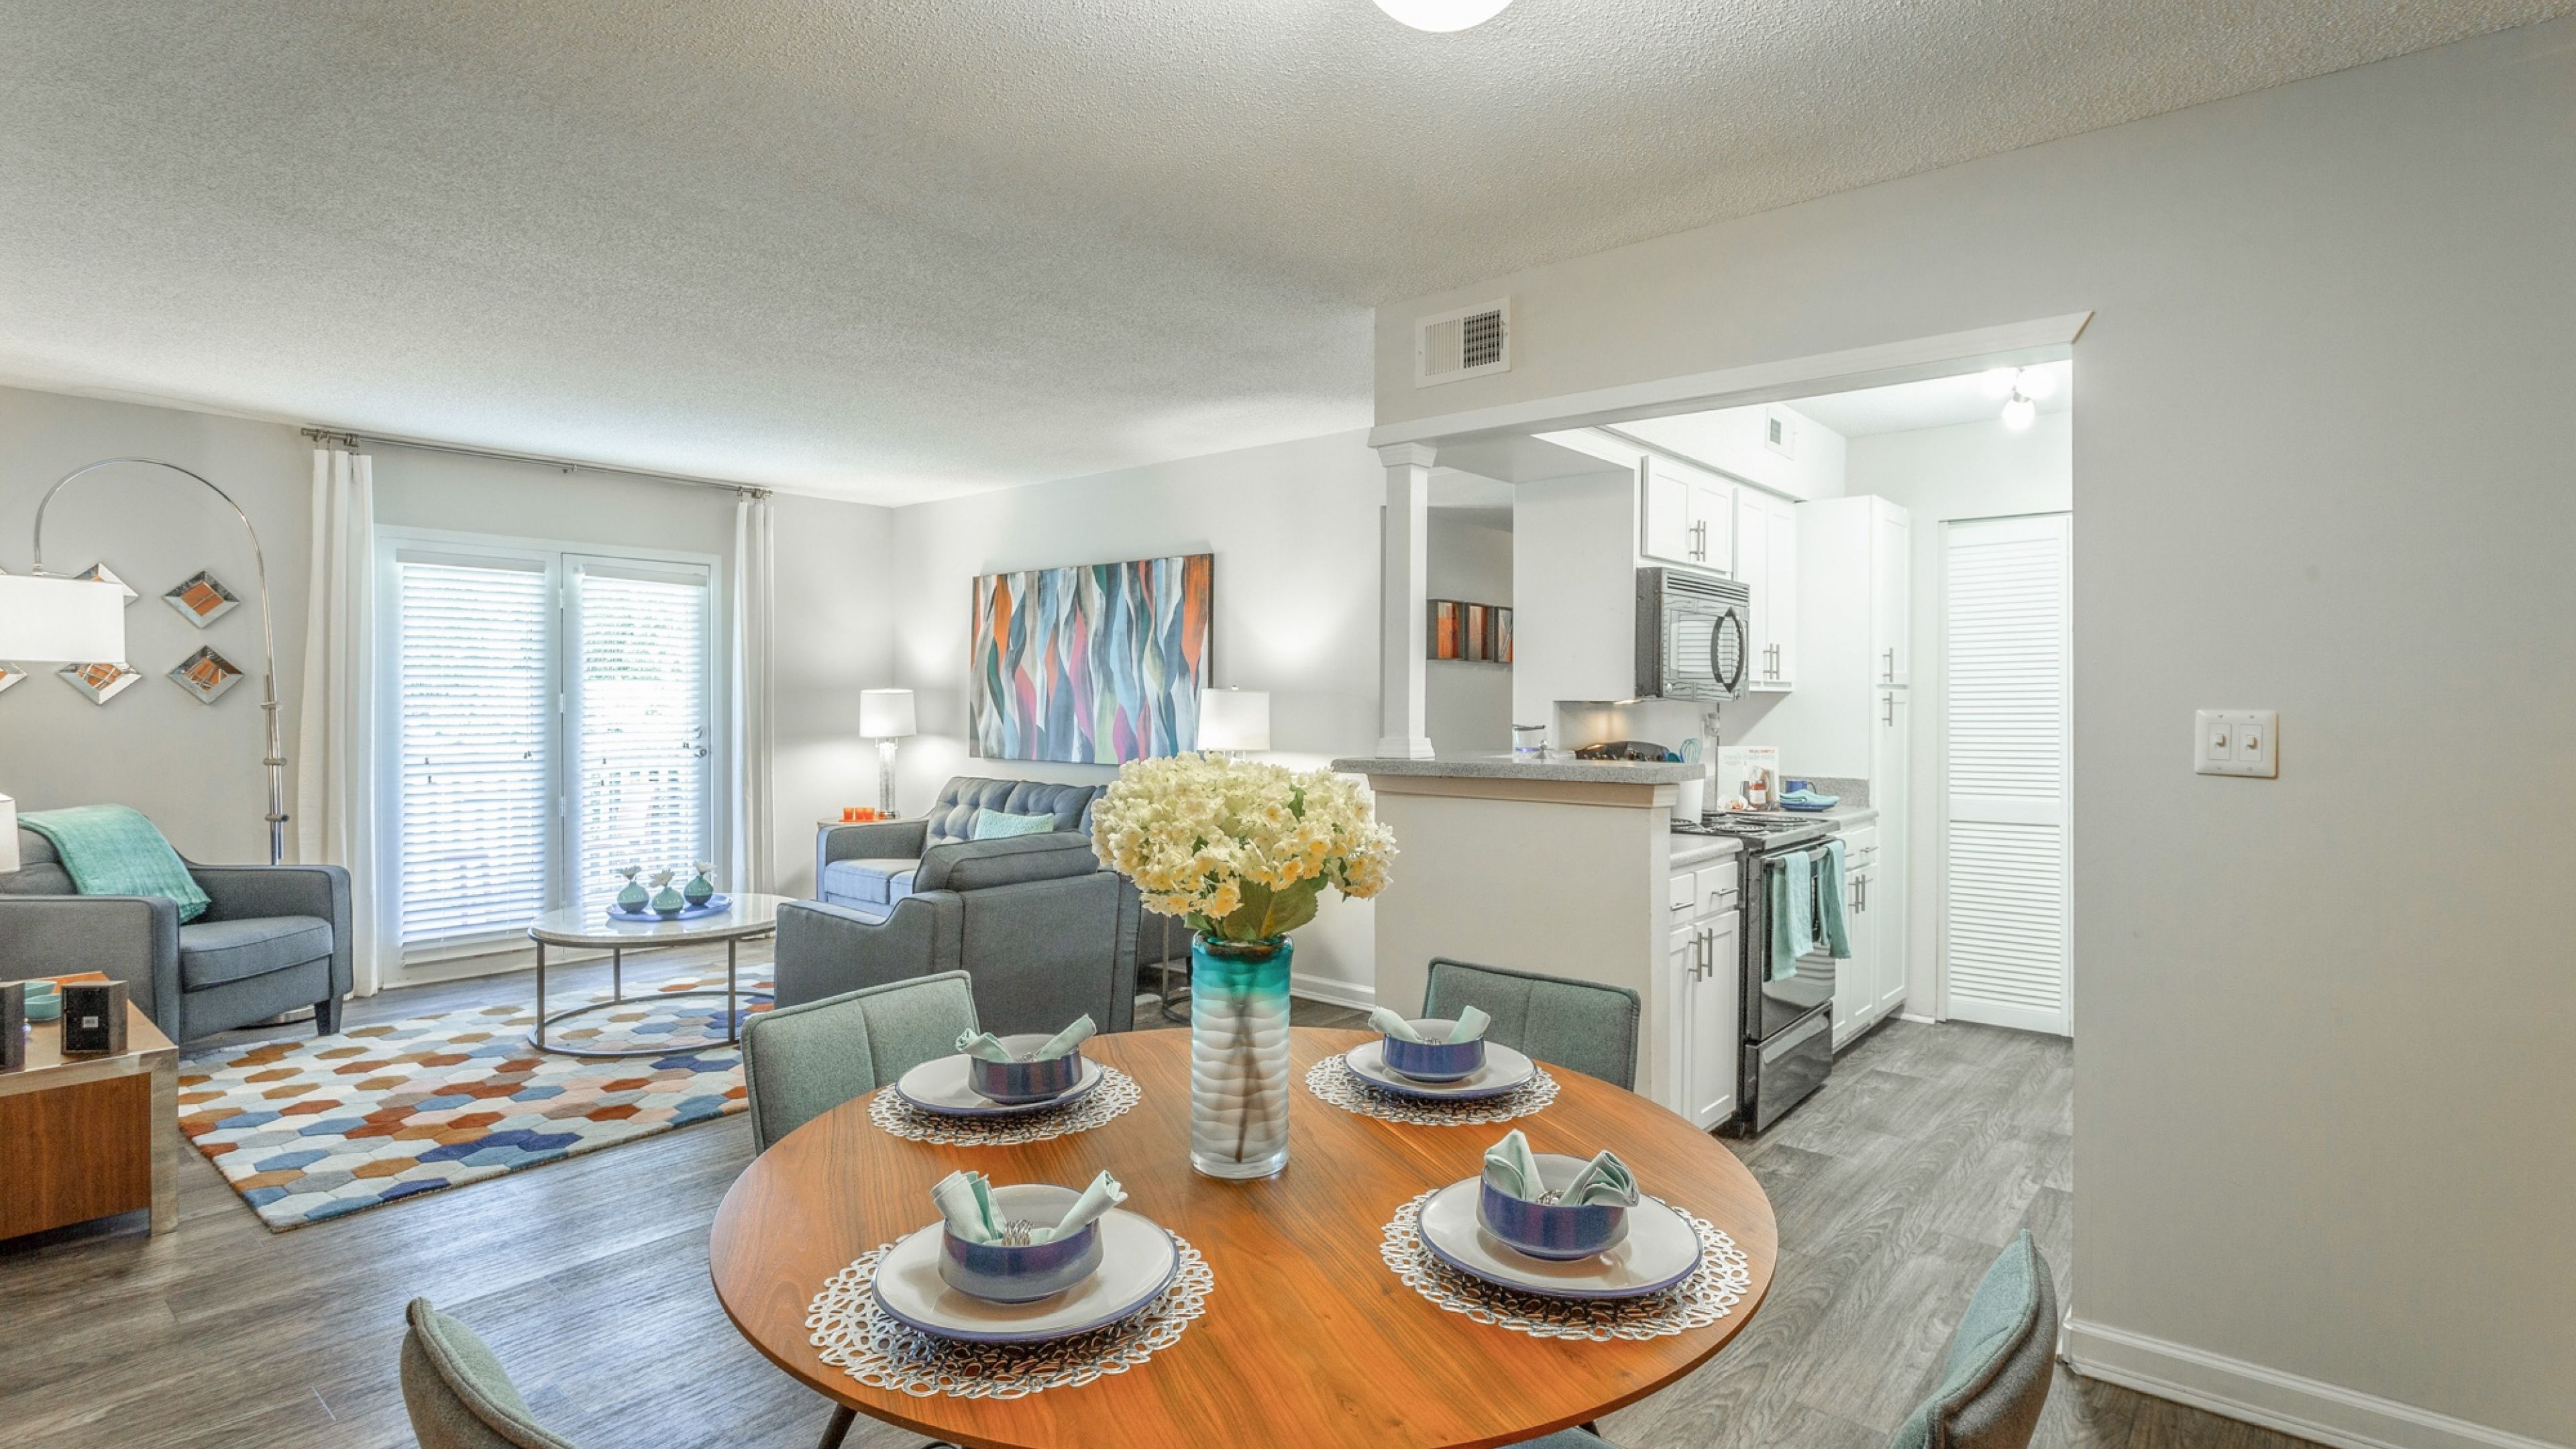 Hawthorne at Lily Flagg apartment living space and kitchen with small dining table, and stainless steel appliances